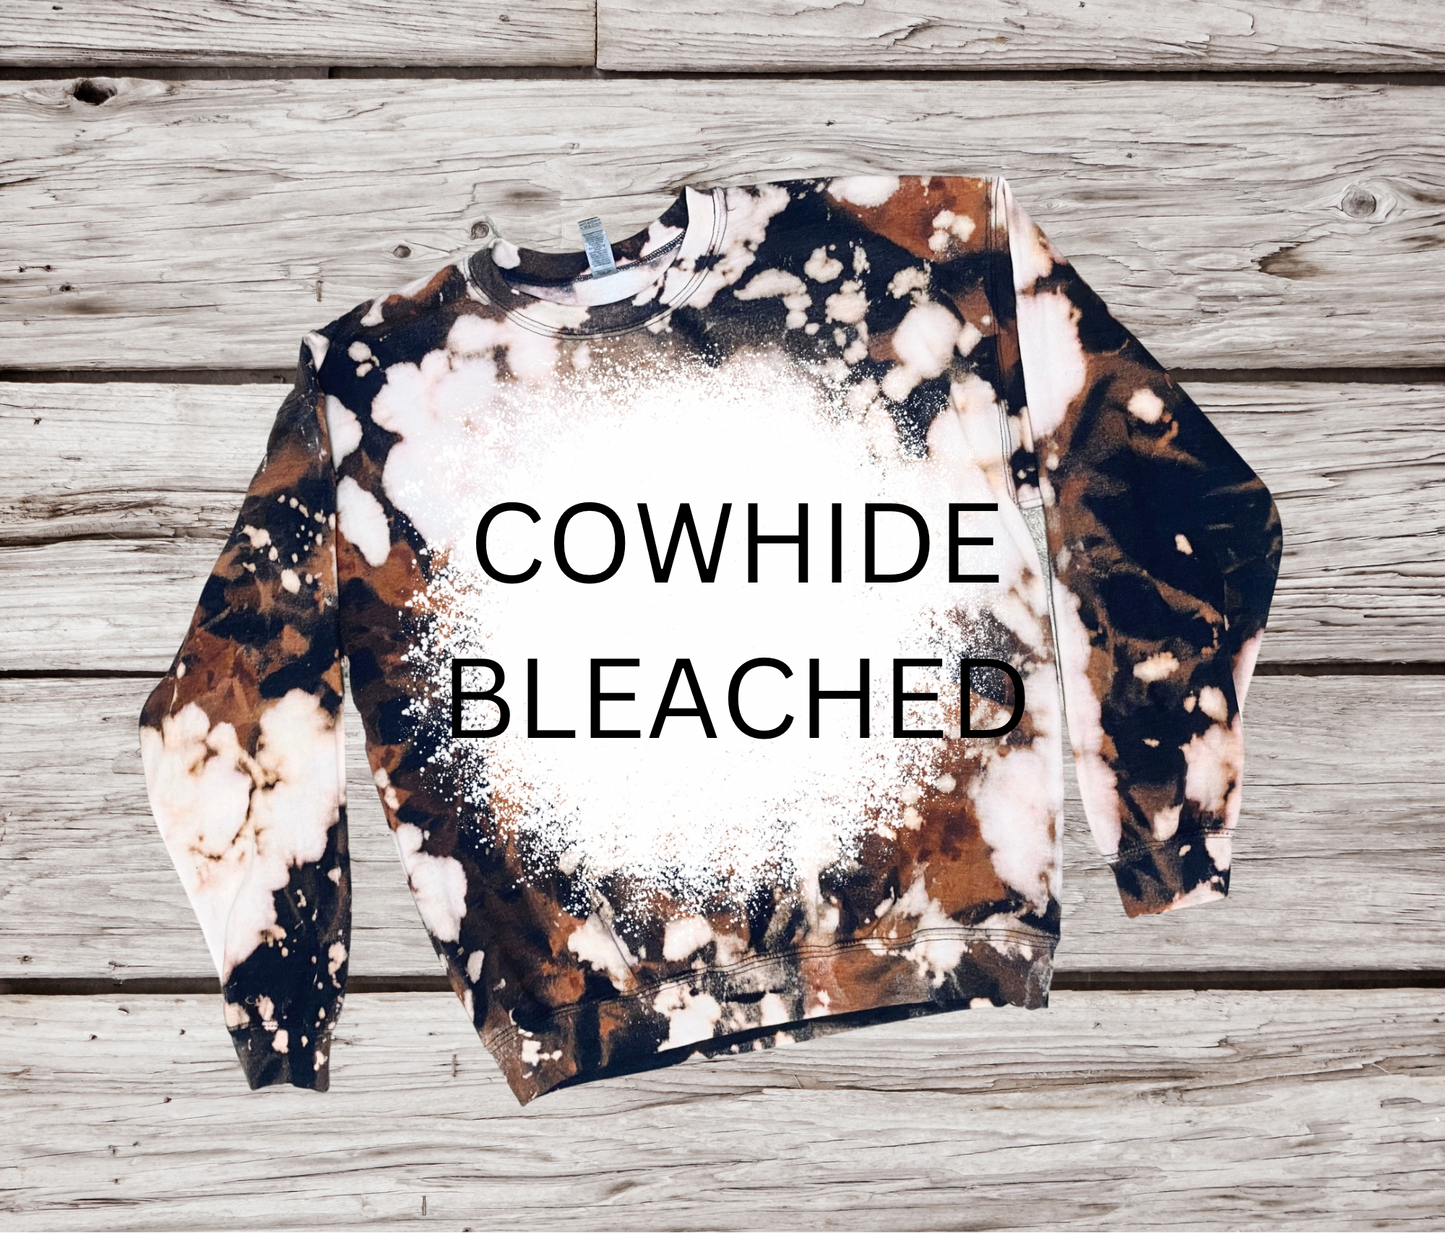 AIN’T MY FIRST RODEO DESIGN! YOU CHOOSE COLOR AND STYLE! TEE OR CREWNECK! BLEACHED OR NON-BLEACHED